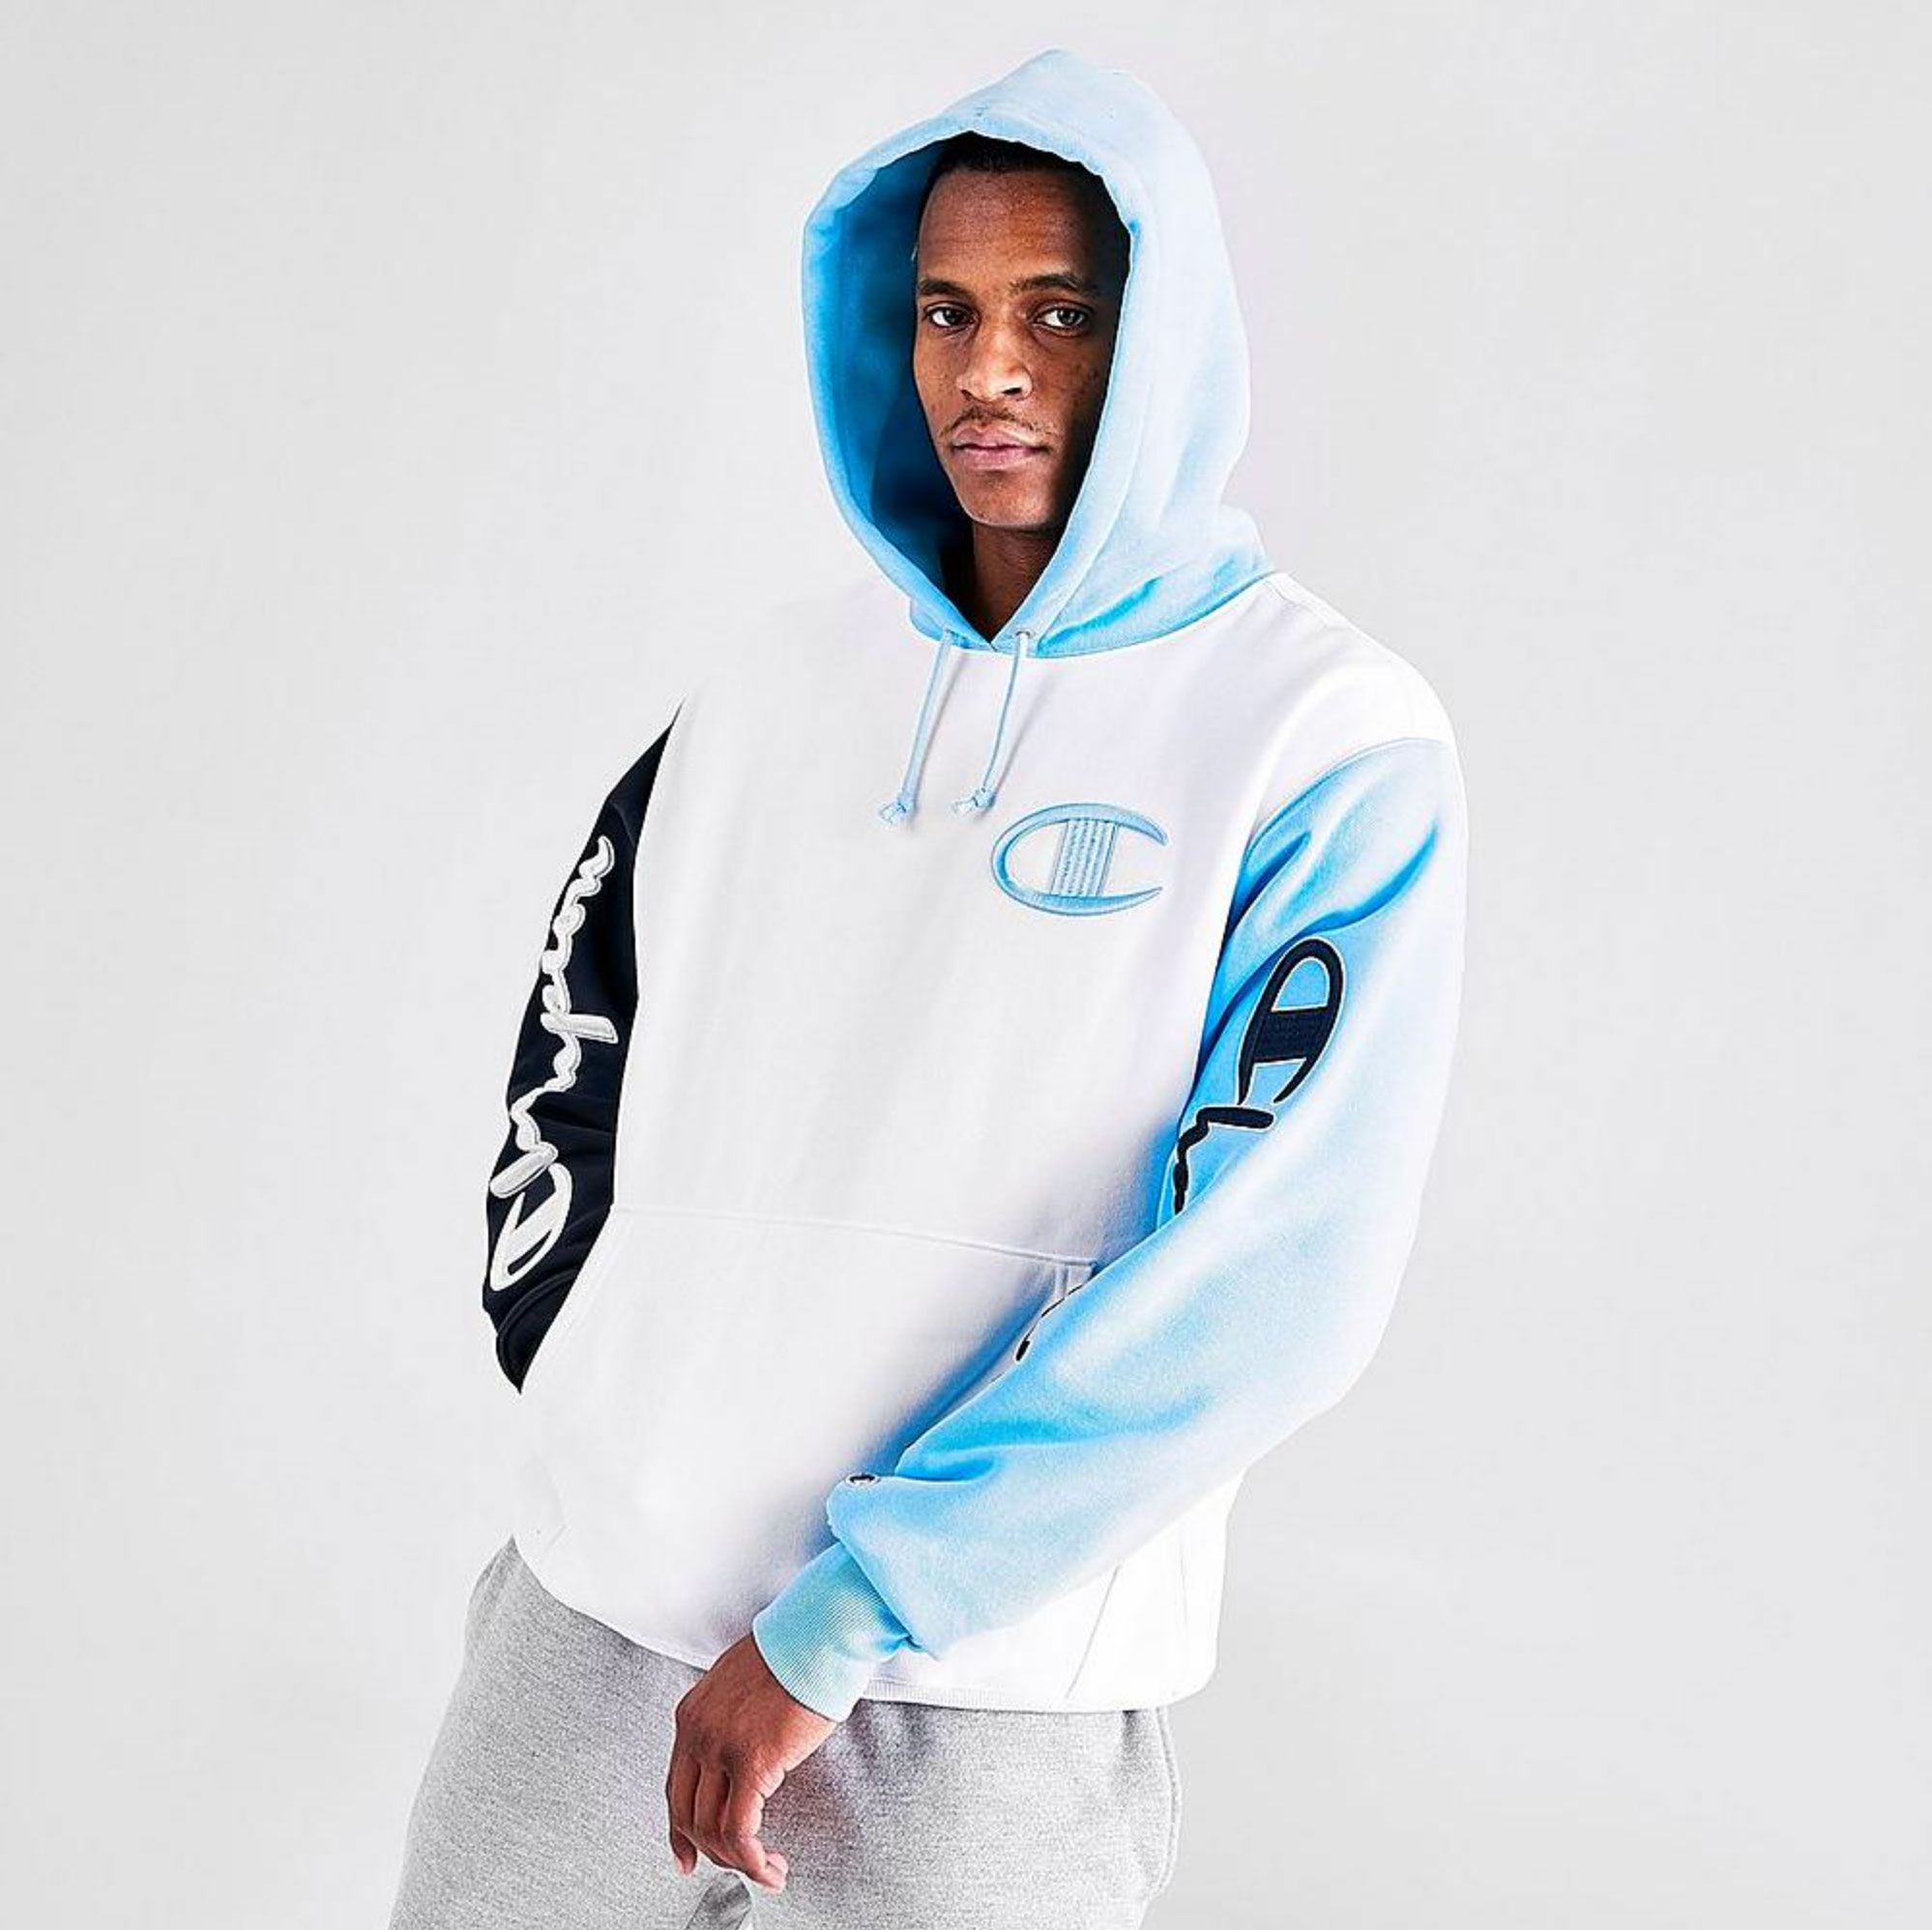 champion hoodie white and blue